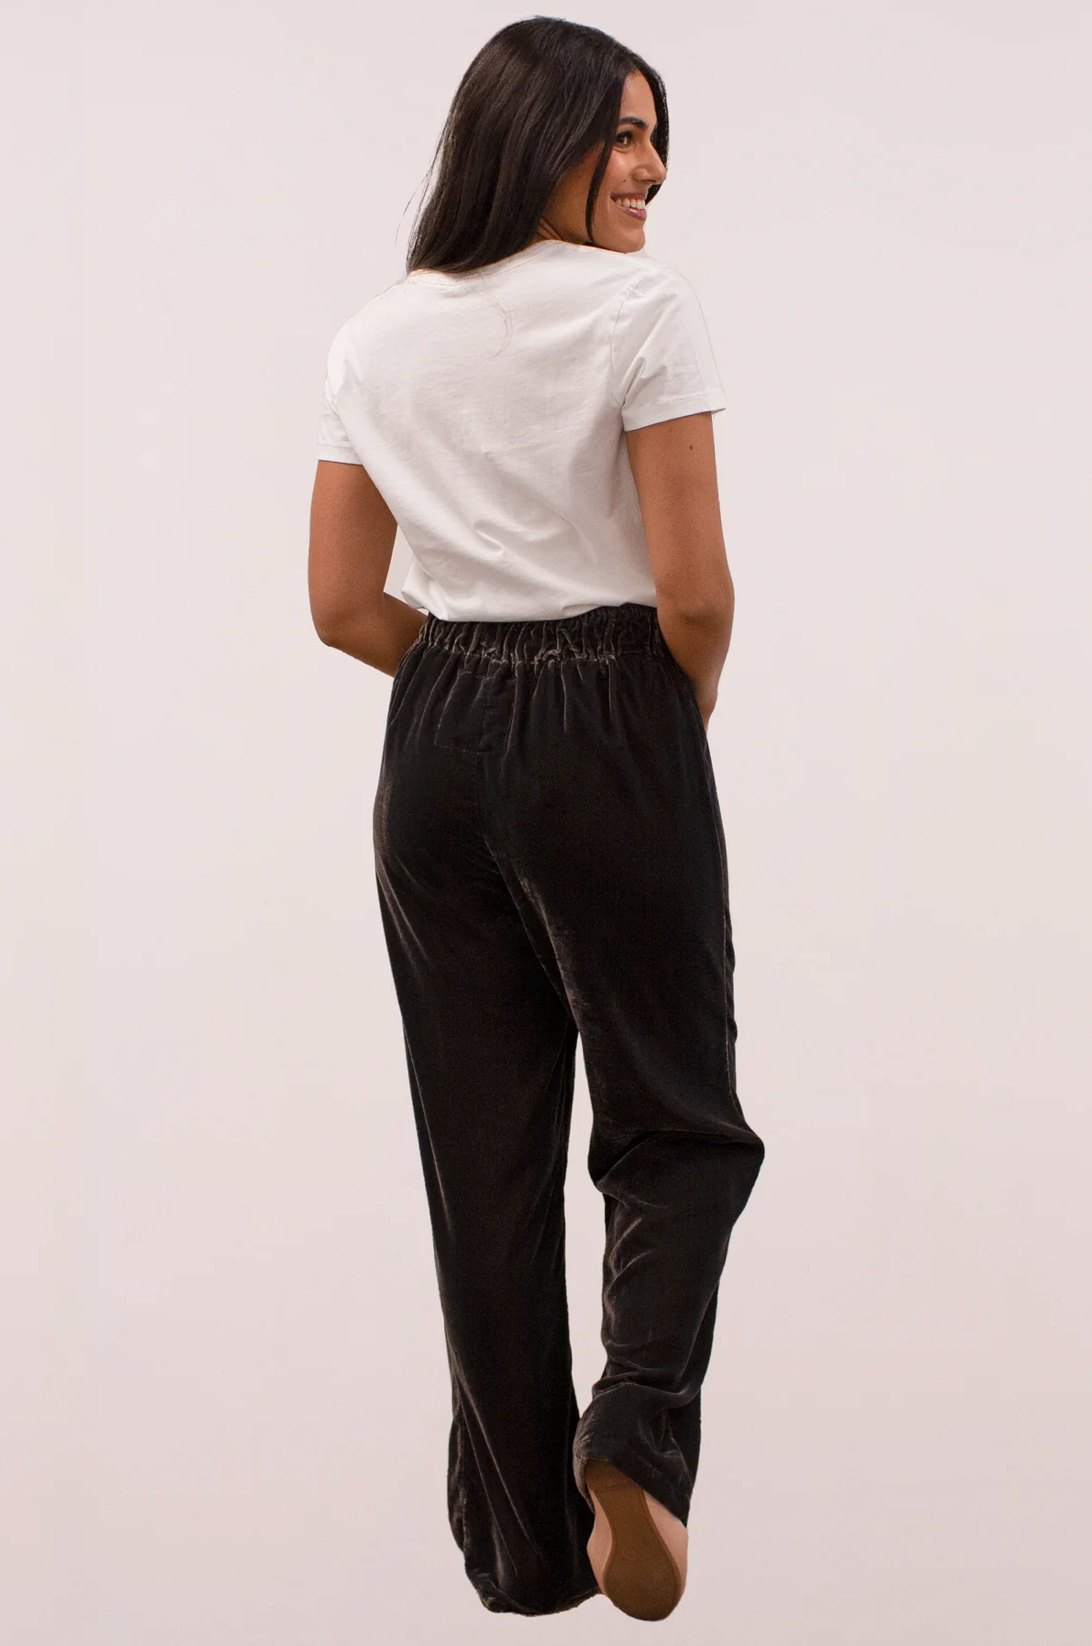 Caite - Kyla Seo Marin Pant - Charcoal available at The Good Life Boutique